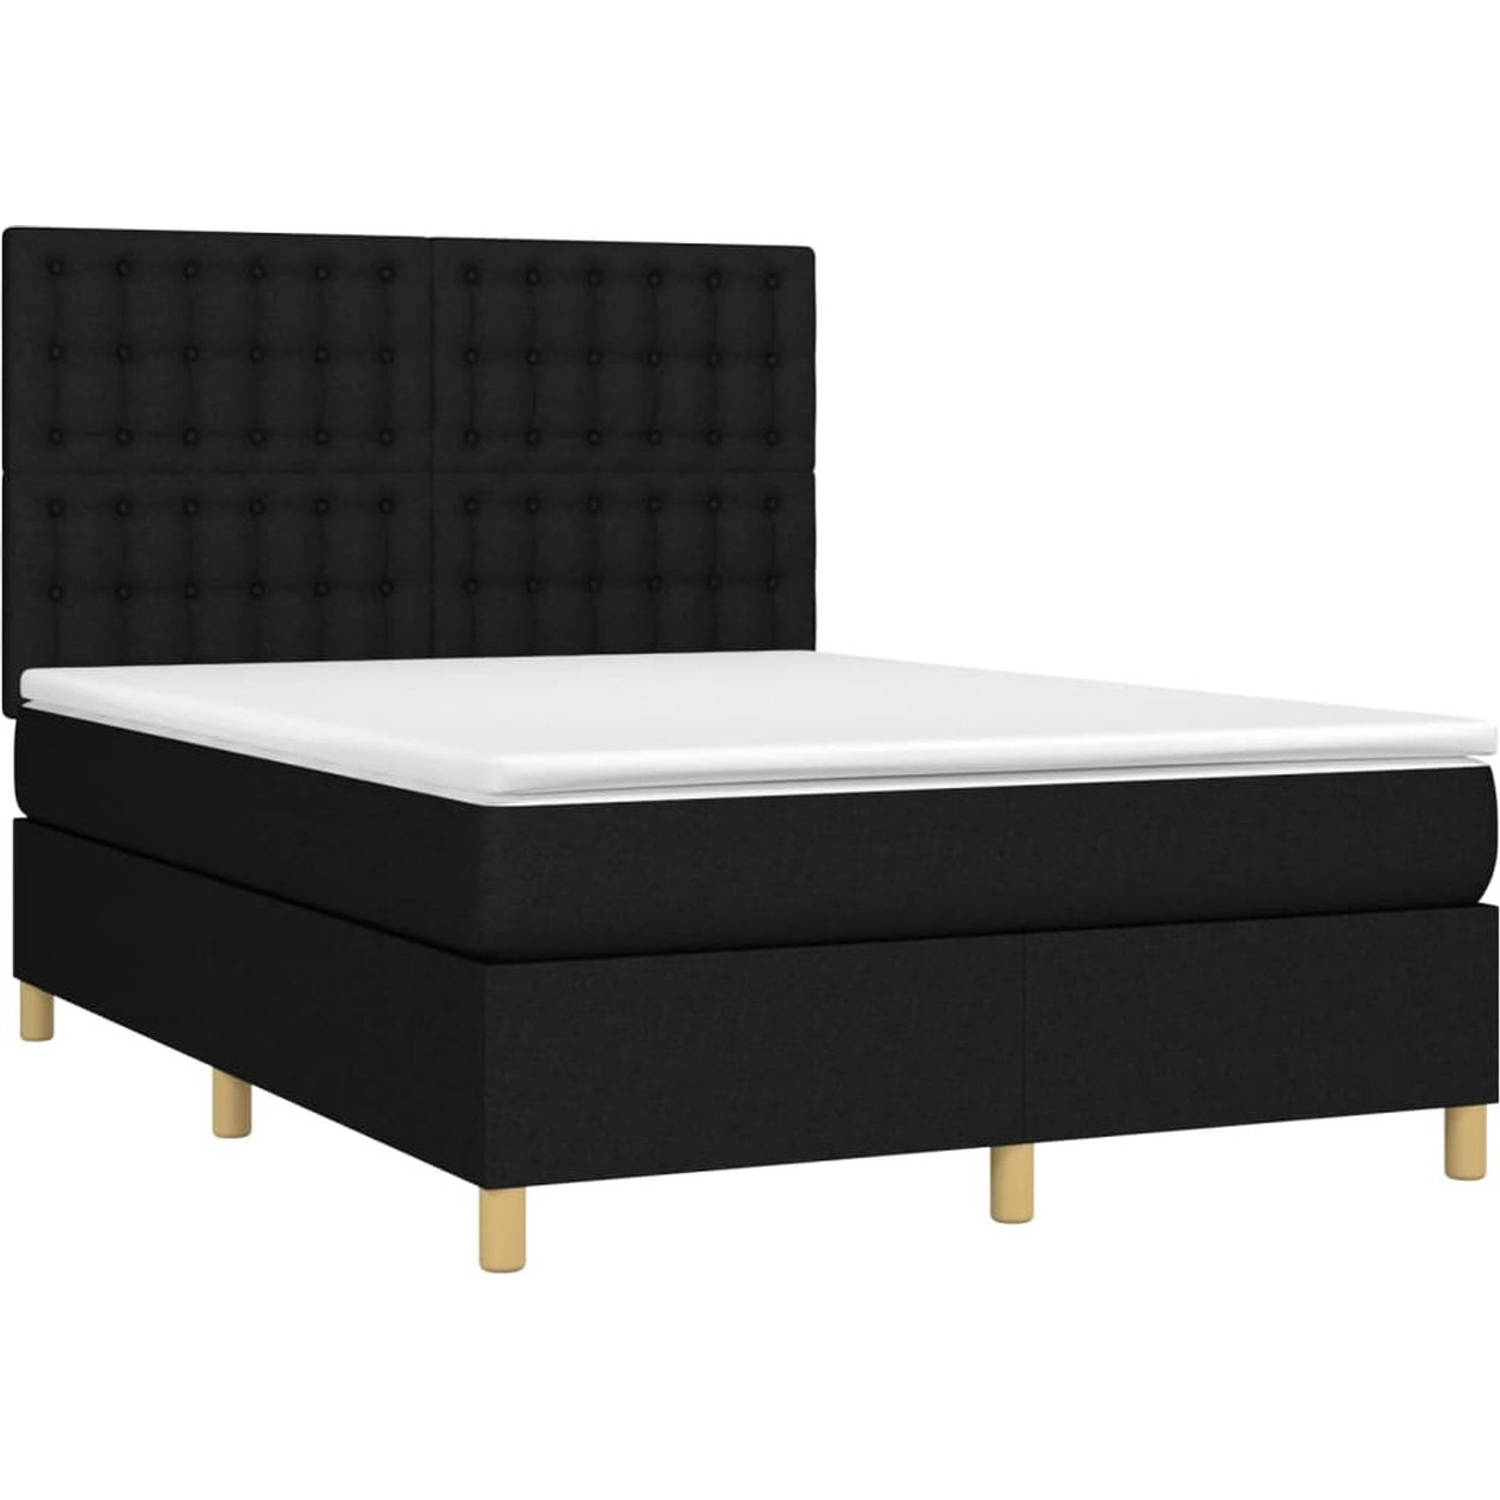 The Living Store Boxspringbed - Comfort - Bed - 203 x 144 x 118/128 cm - Zwart